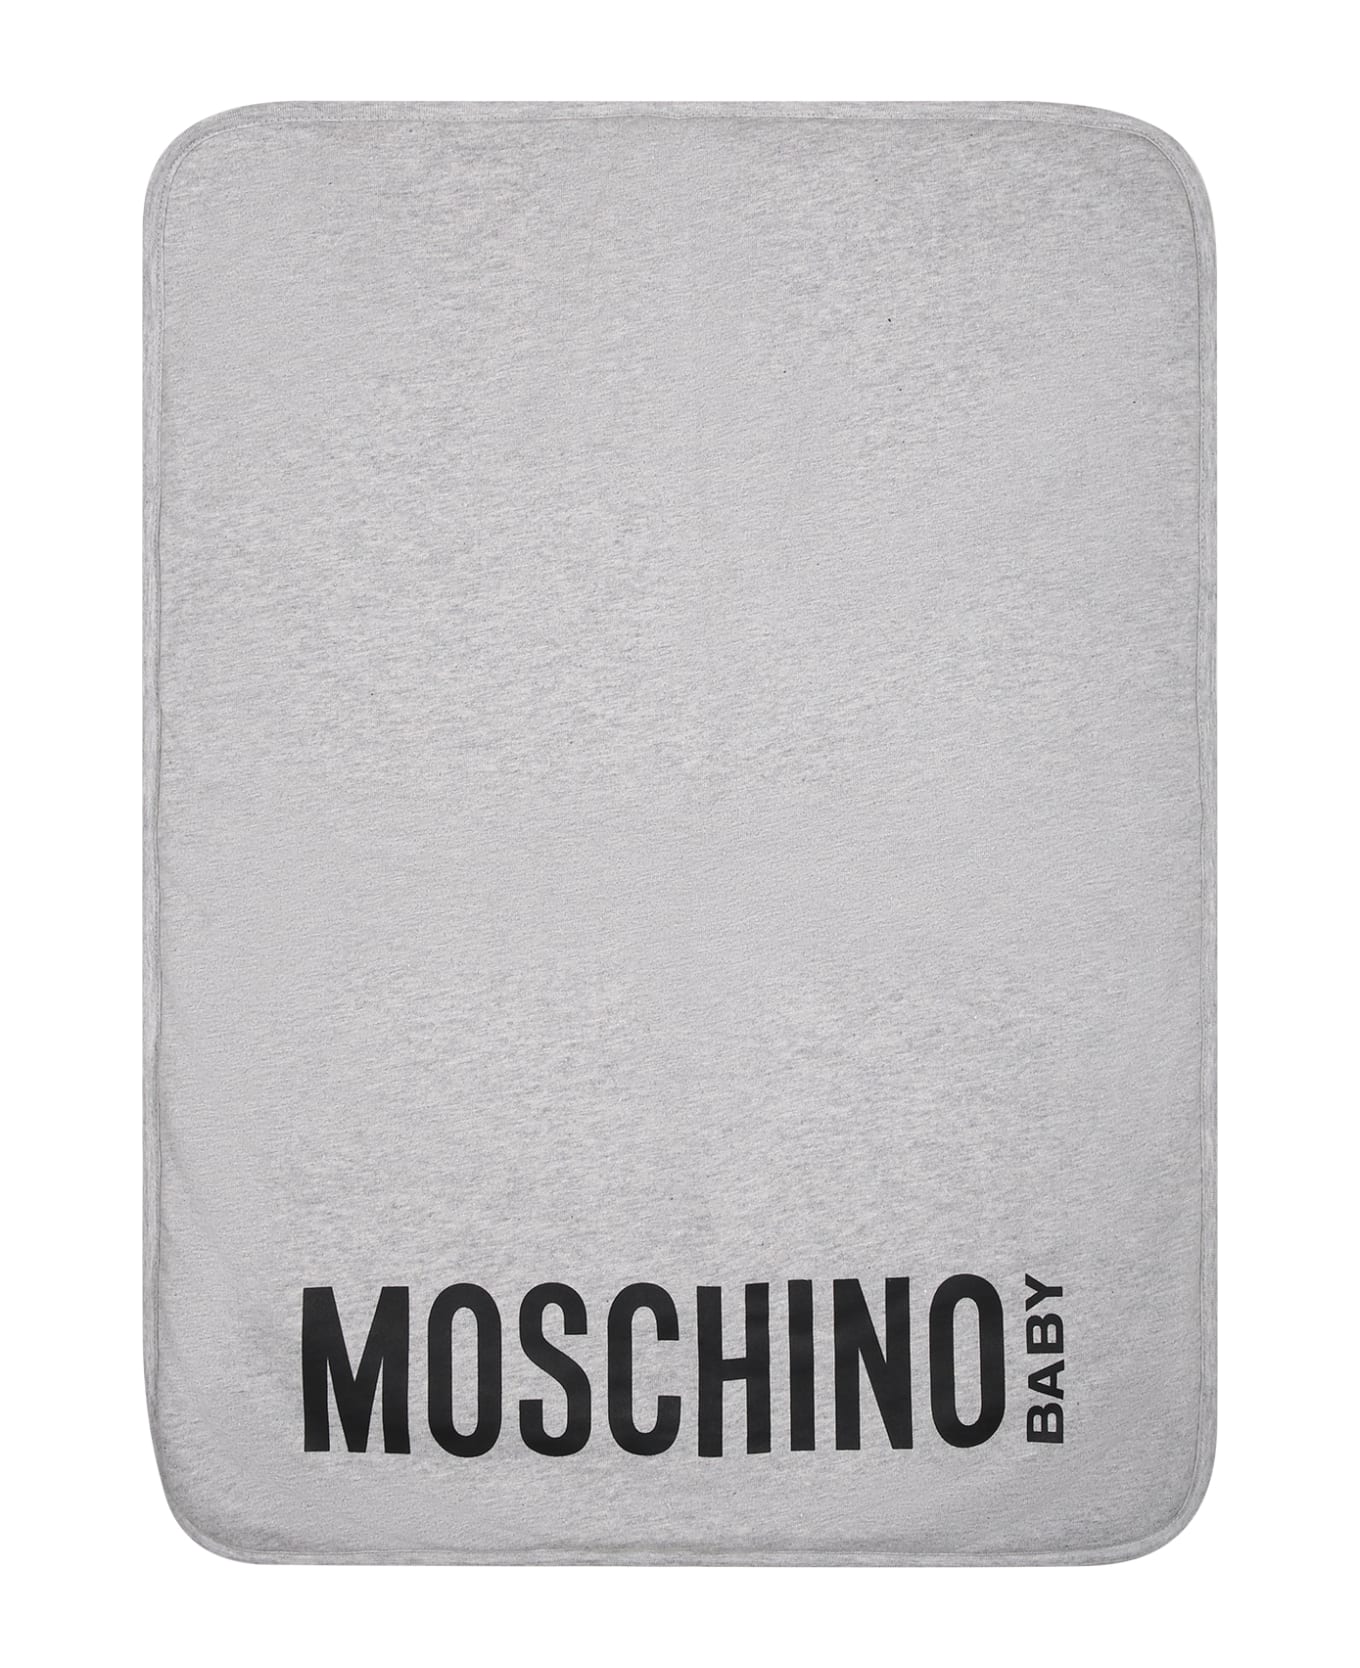 Moschino Gray Mother Bag For Babies With Teddy Bear And Logo - Grey